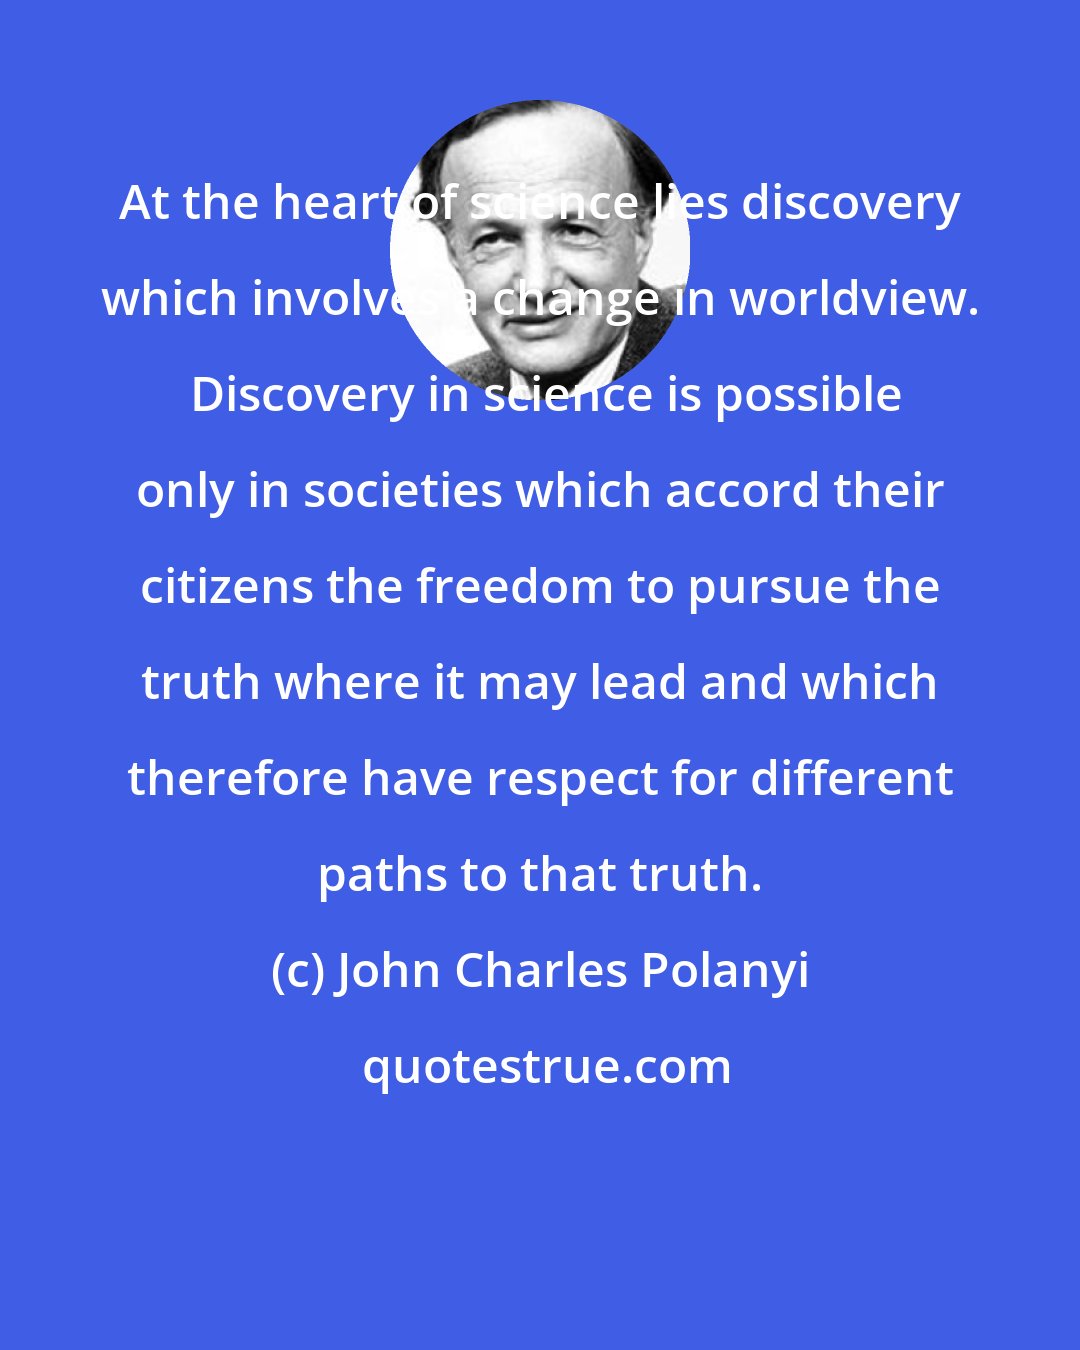 John Charles Polanyi: At the heart of science lies discovery which involves a change in worldview.  Discovery in science is possible only in societies which accord their citizens the freedom to pursue the truth where it may lead and which therefore have respect for different paths to that truth.